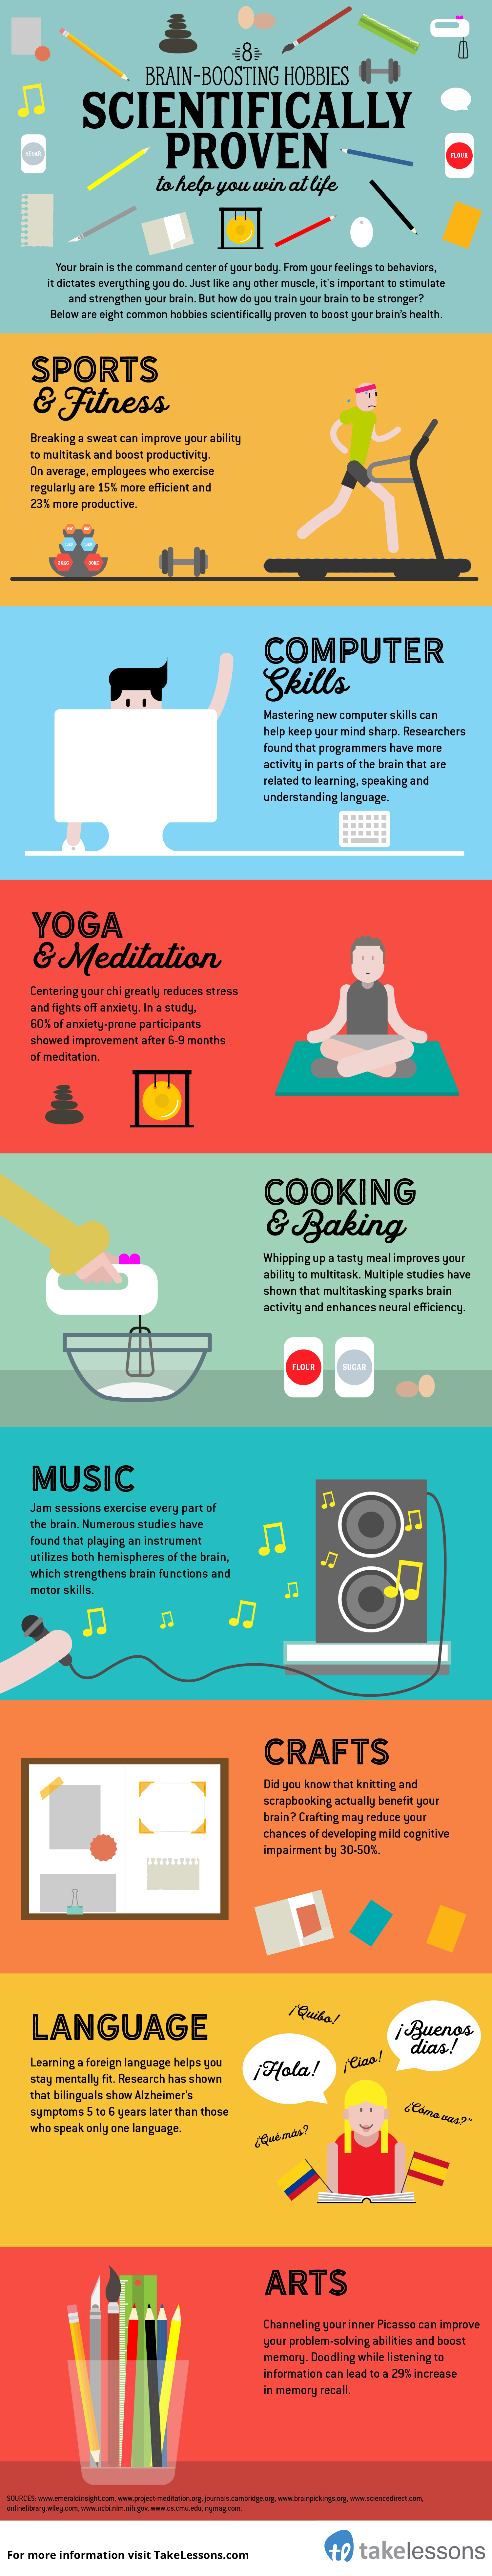 https://takelessons.com/blog/wp-content/uploads/2016/06/8-best-hobbies-for-your-brain-infographic.png